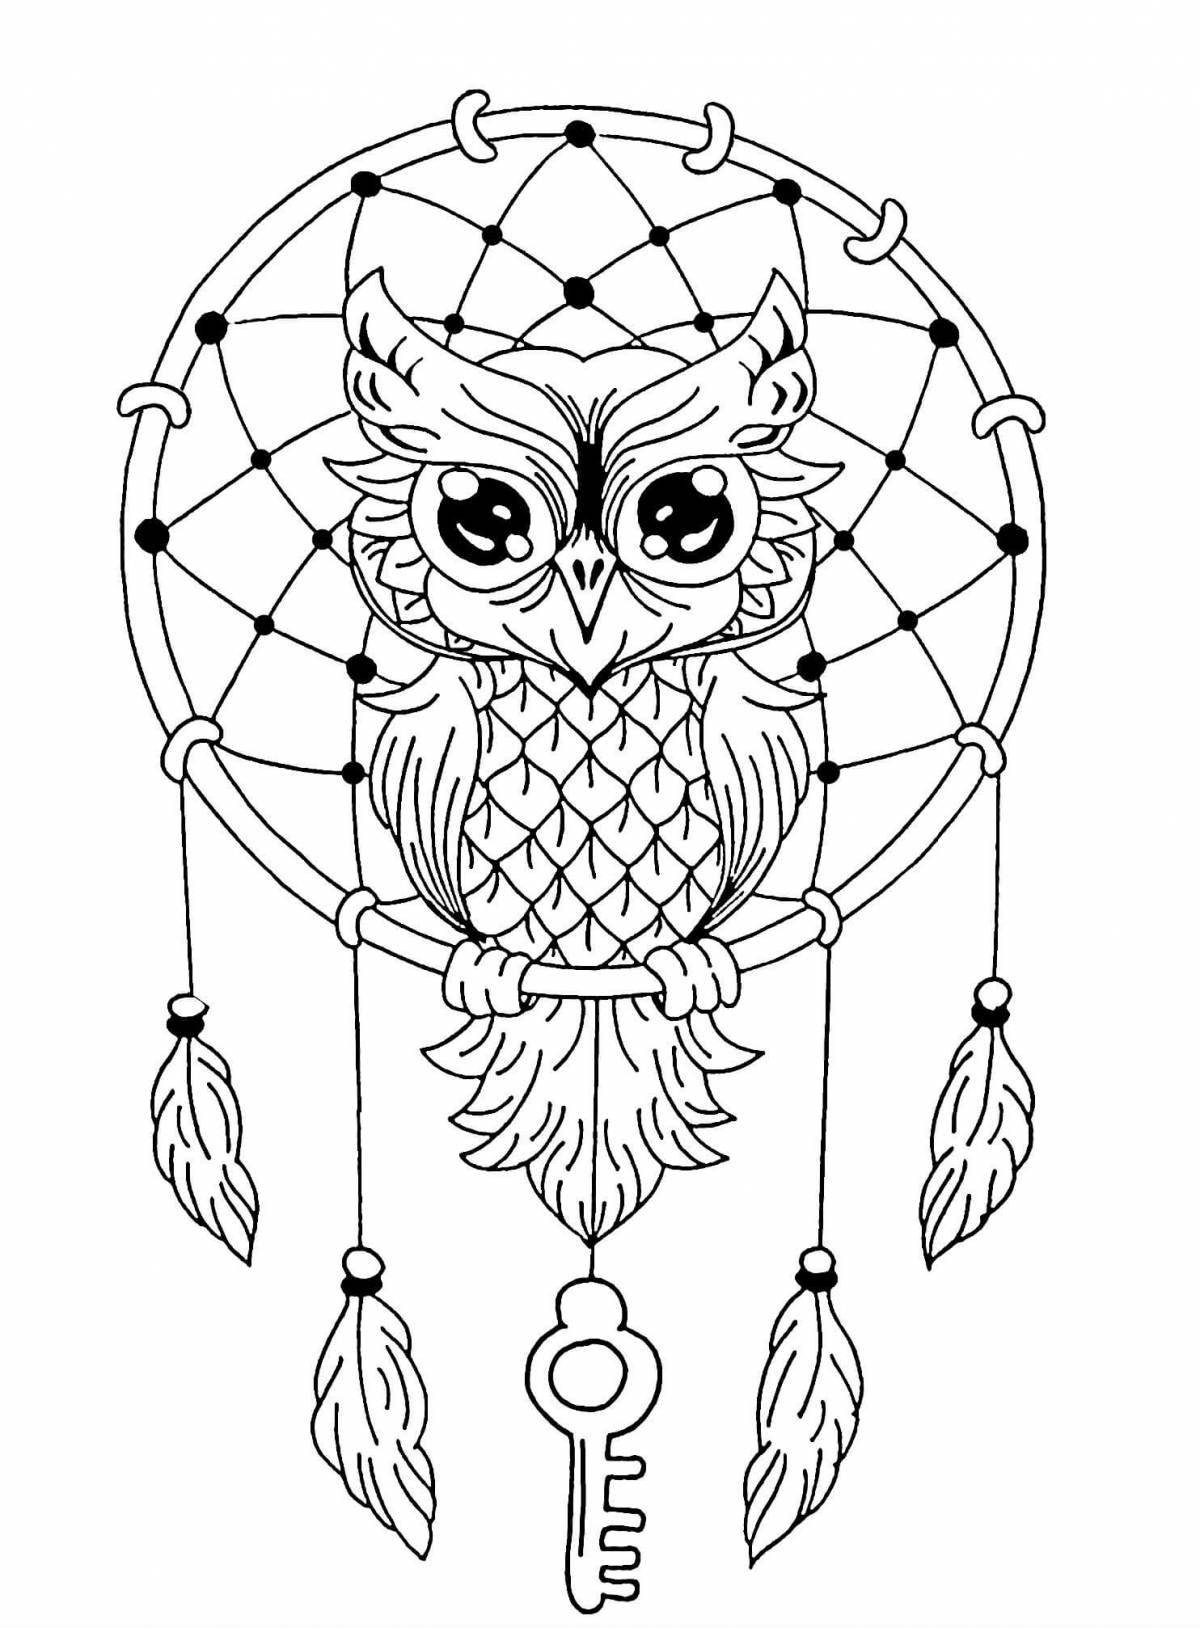 Bright coloring booklet